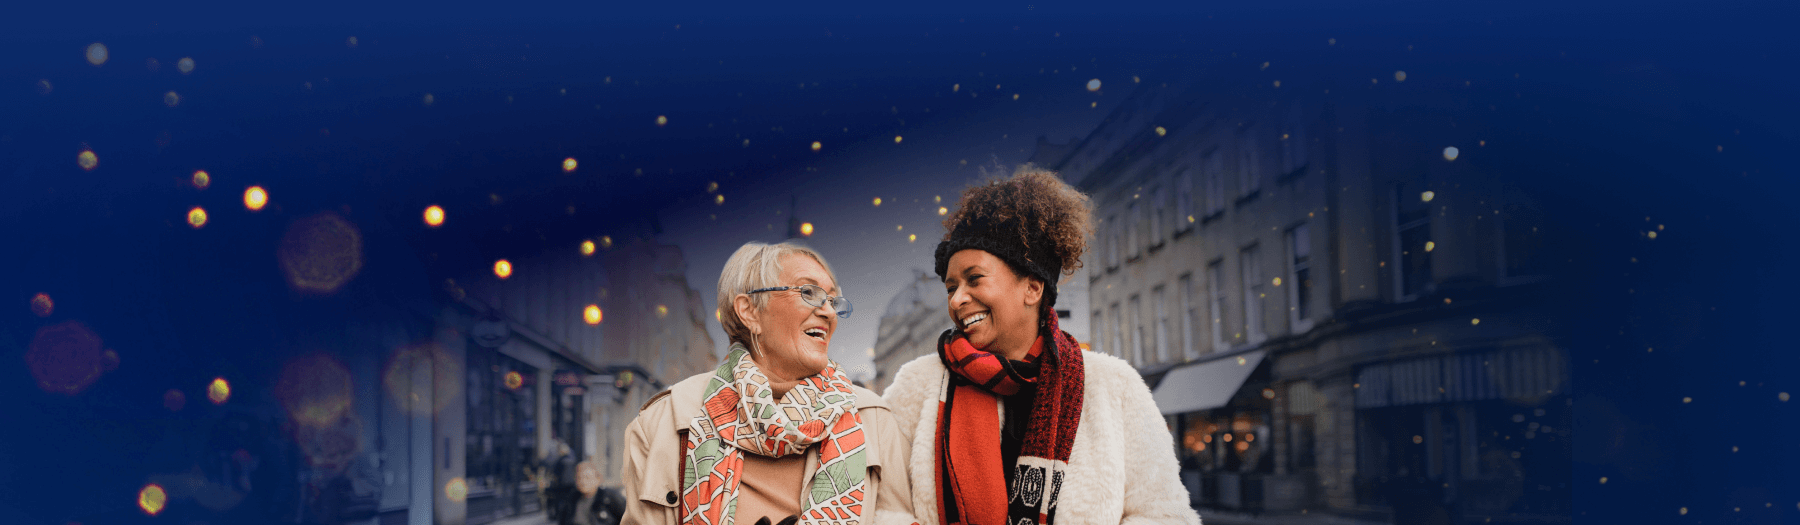 Older ladies walking in the city, smiling at each other, carrying Christmas shopping